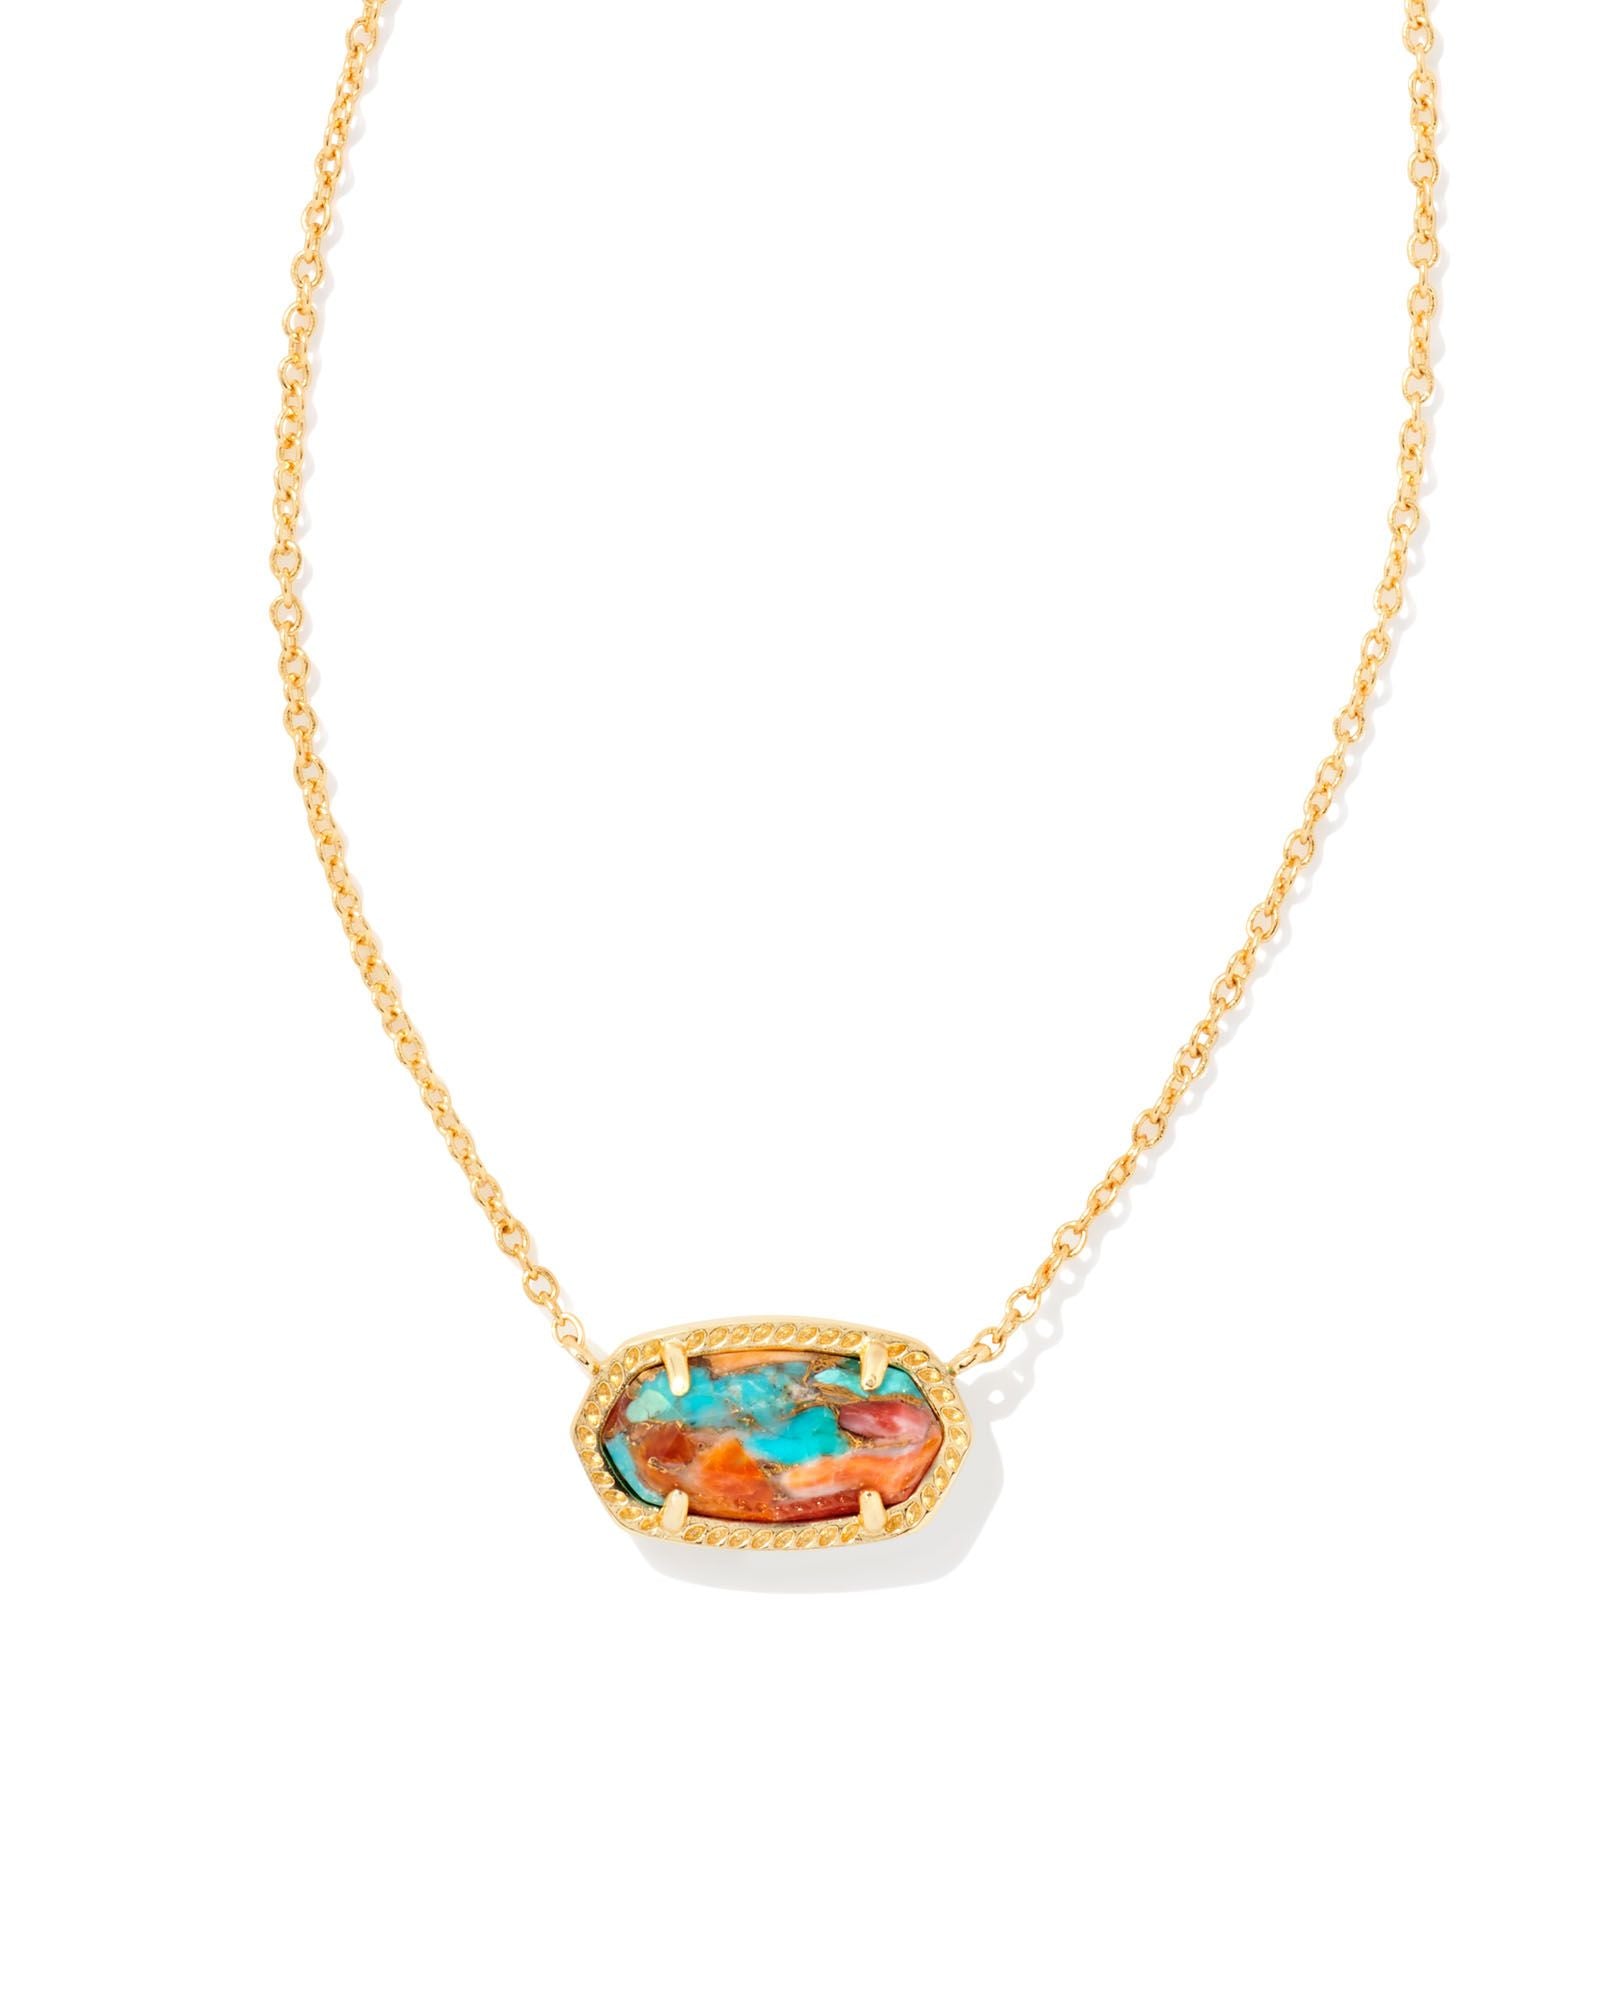 Elisa Necklace in Gold Bronze Veined Turquoise Magnesite Red Oyster